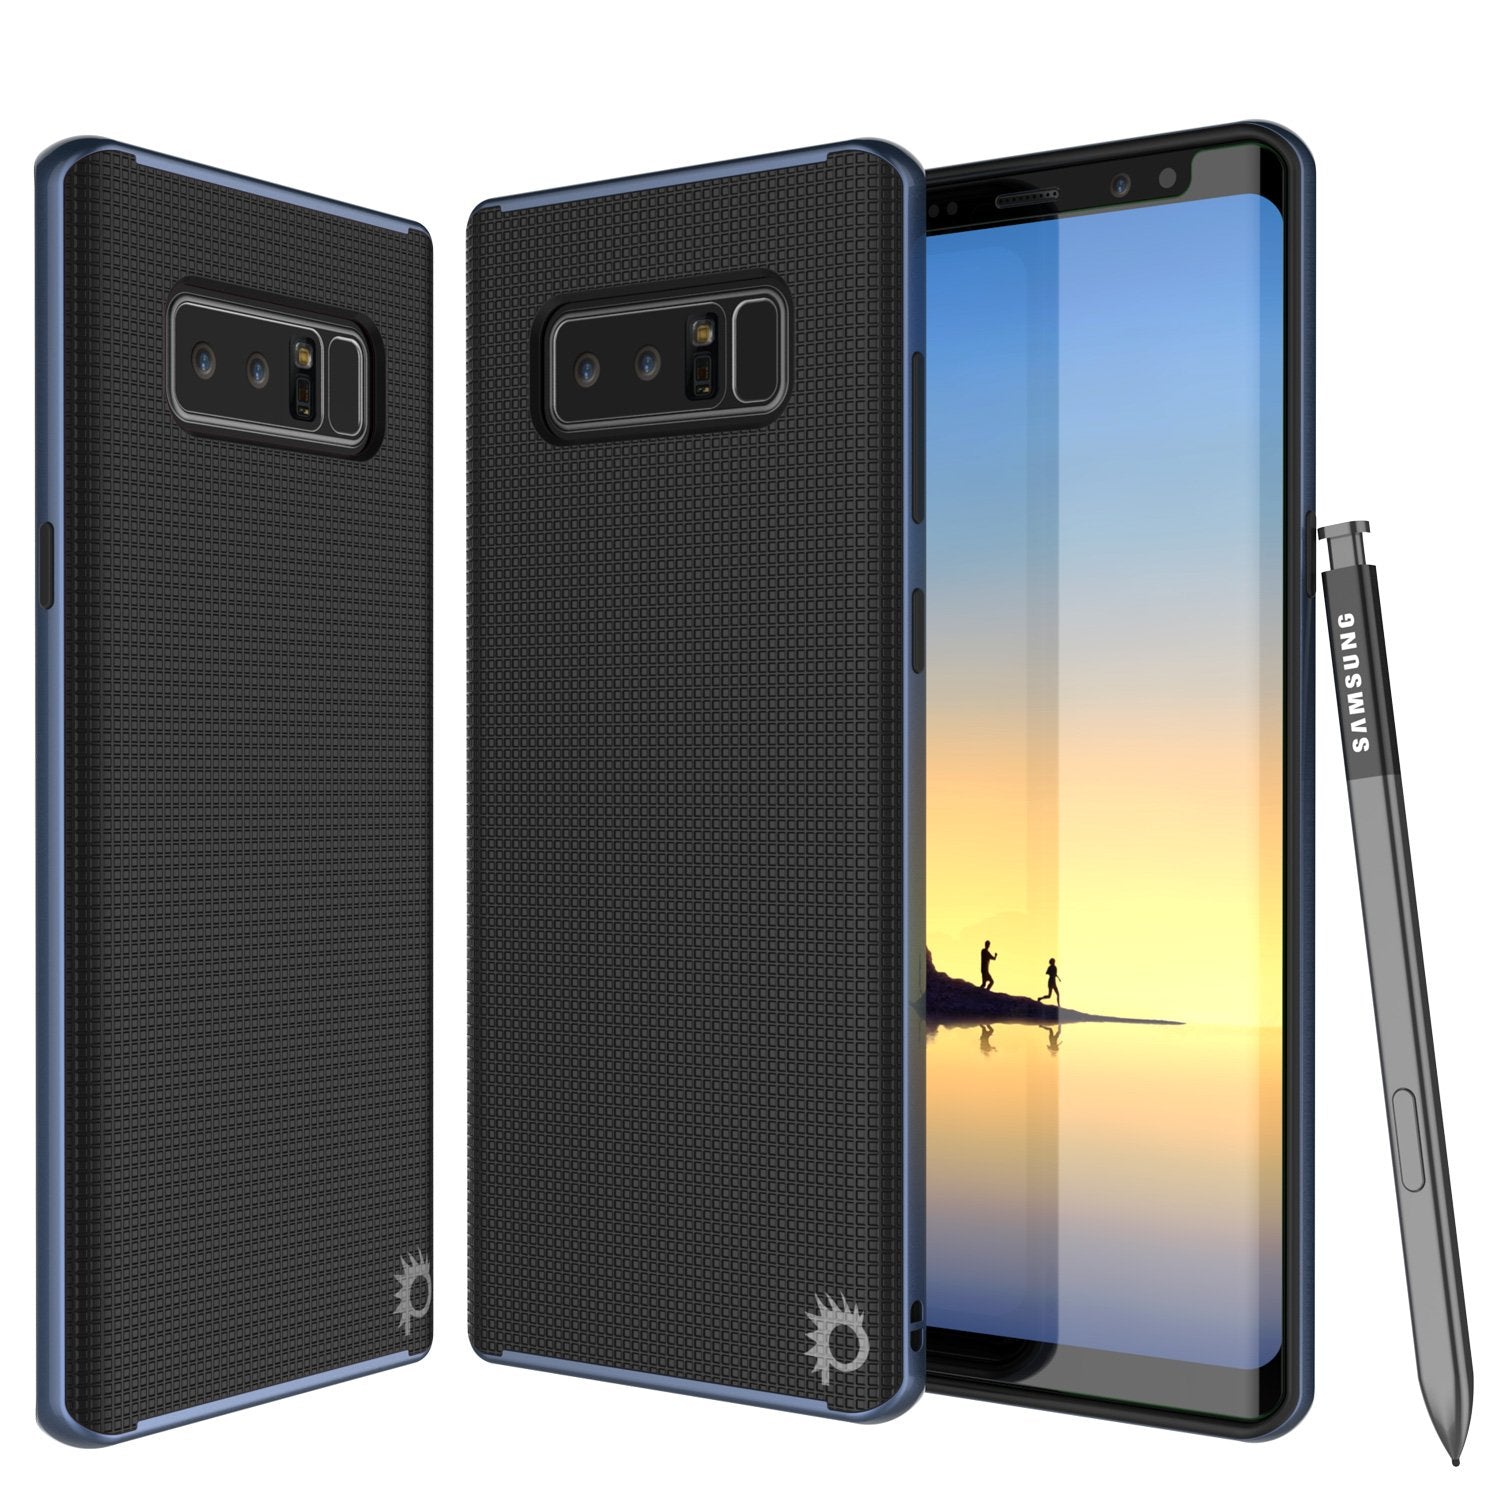 Galaxy Note 8 Screen/Shock Protective Dual Layer Case [Navy Blue]